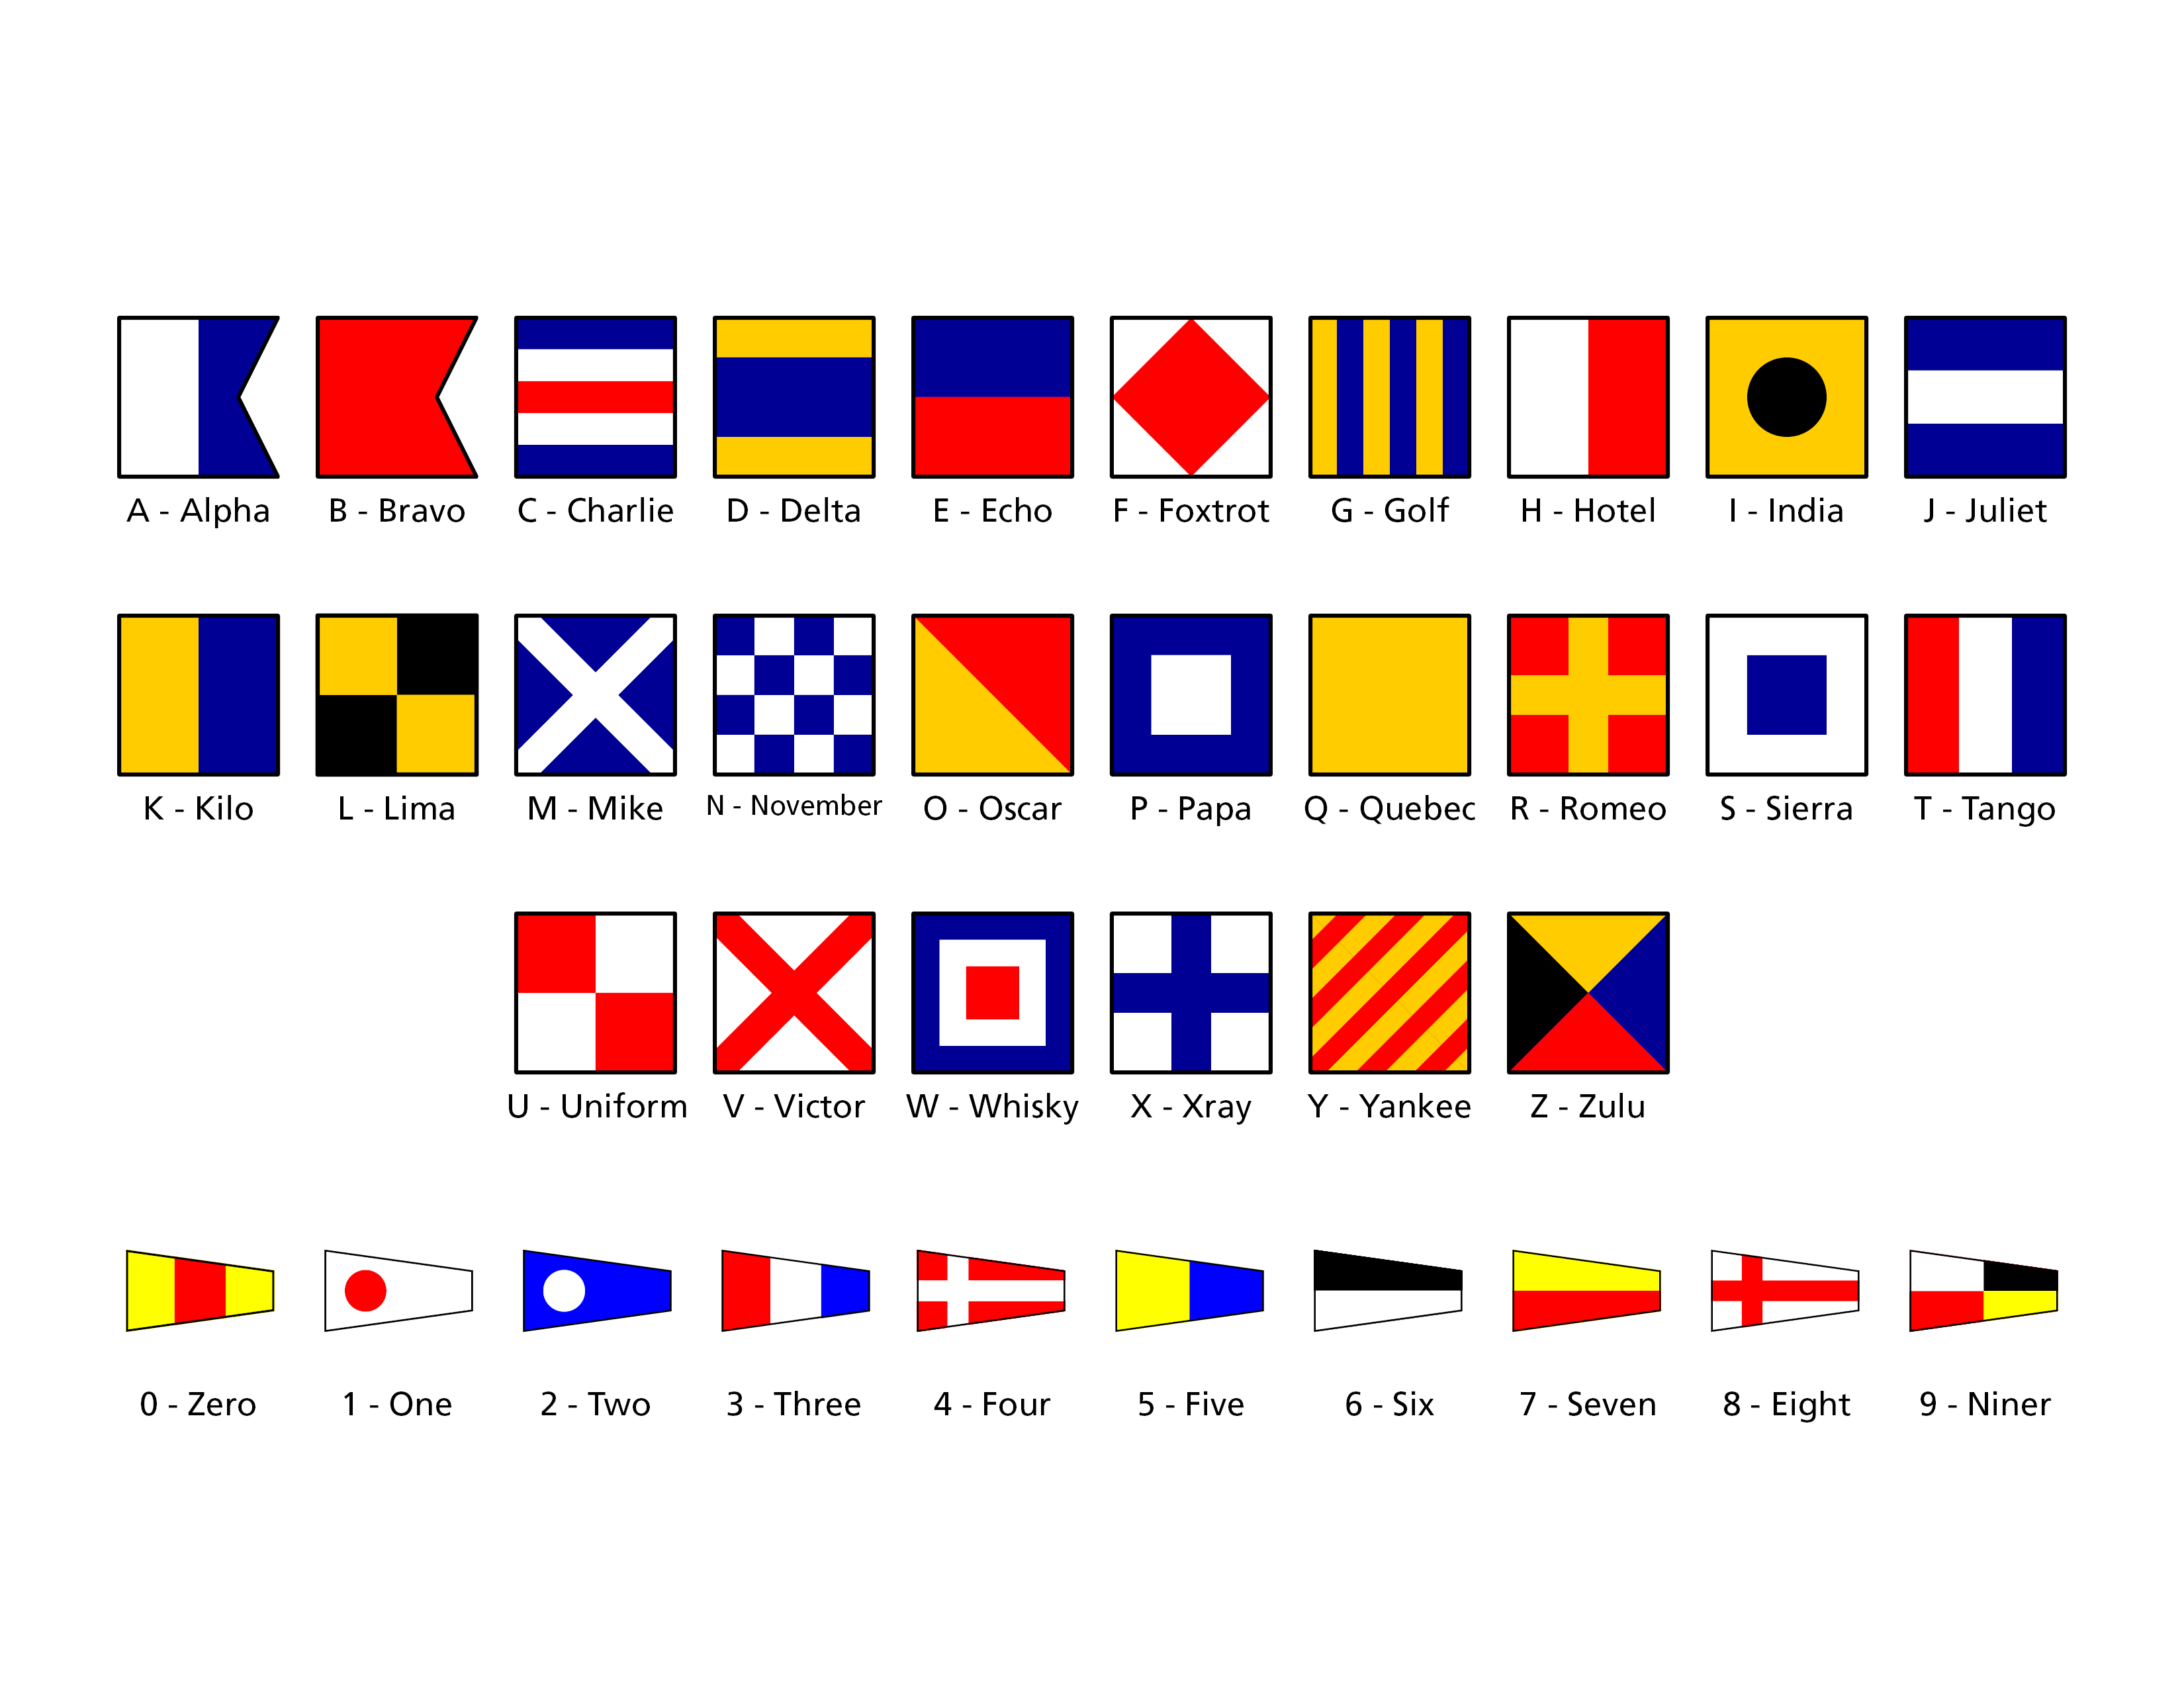 4 rows of square flags each representing a letter of the alphabet or the numbers 0 through 9. Each flag has the letter or number and their phonetic name below them